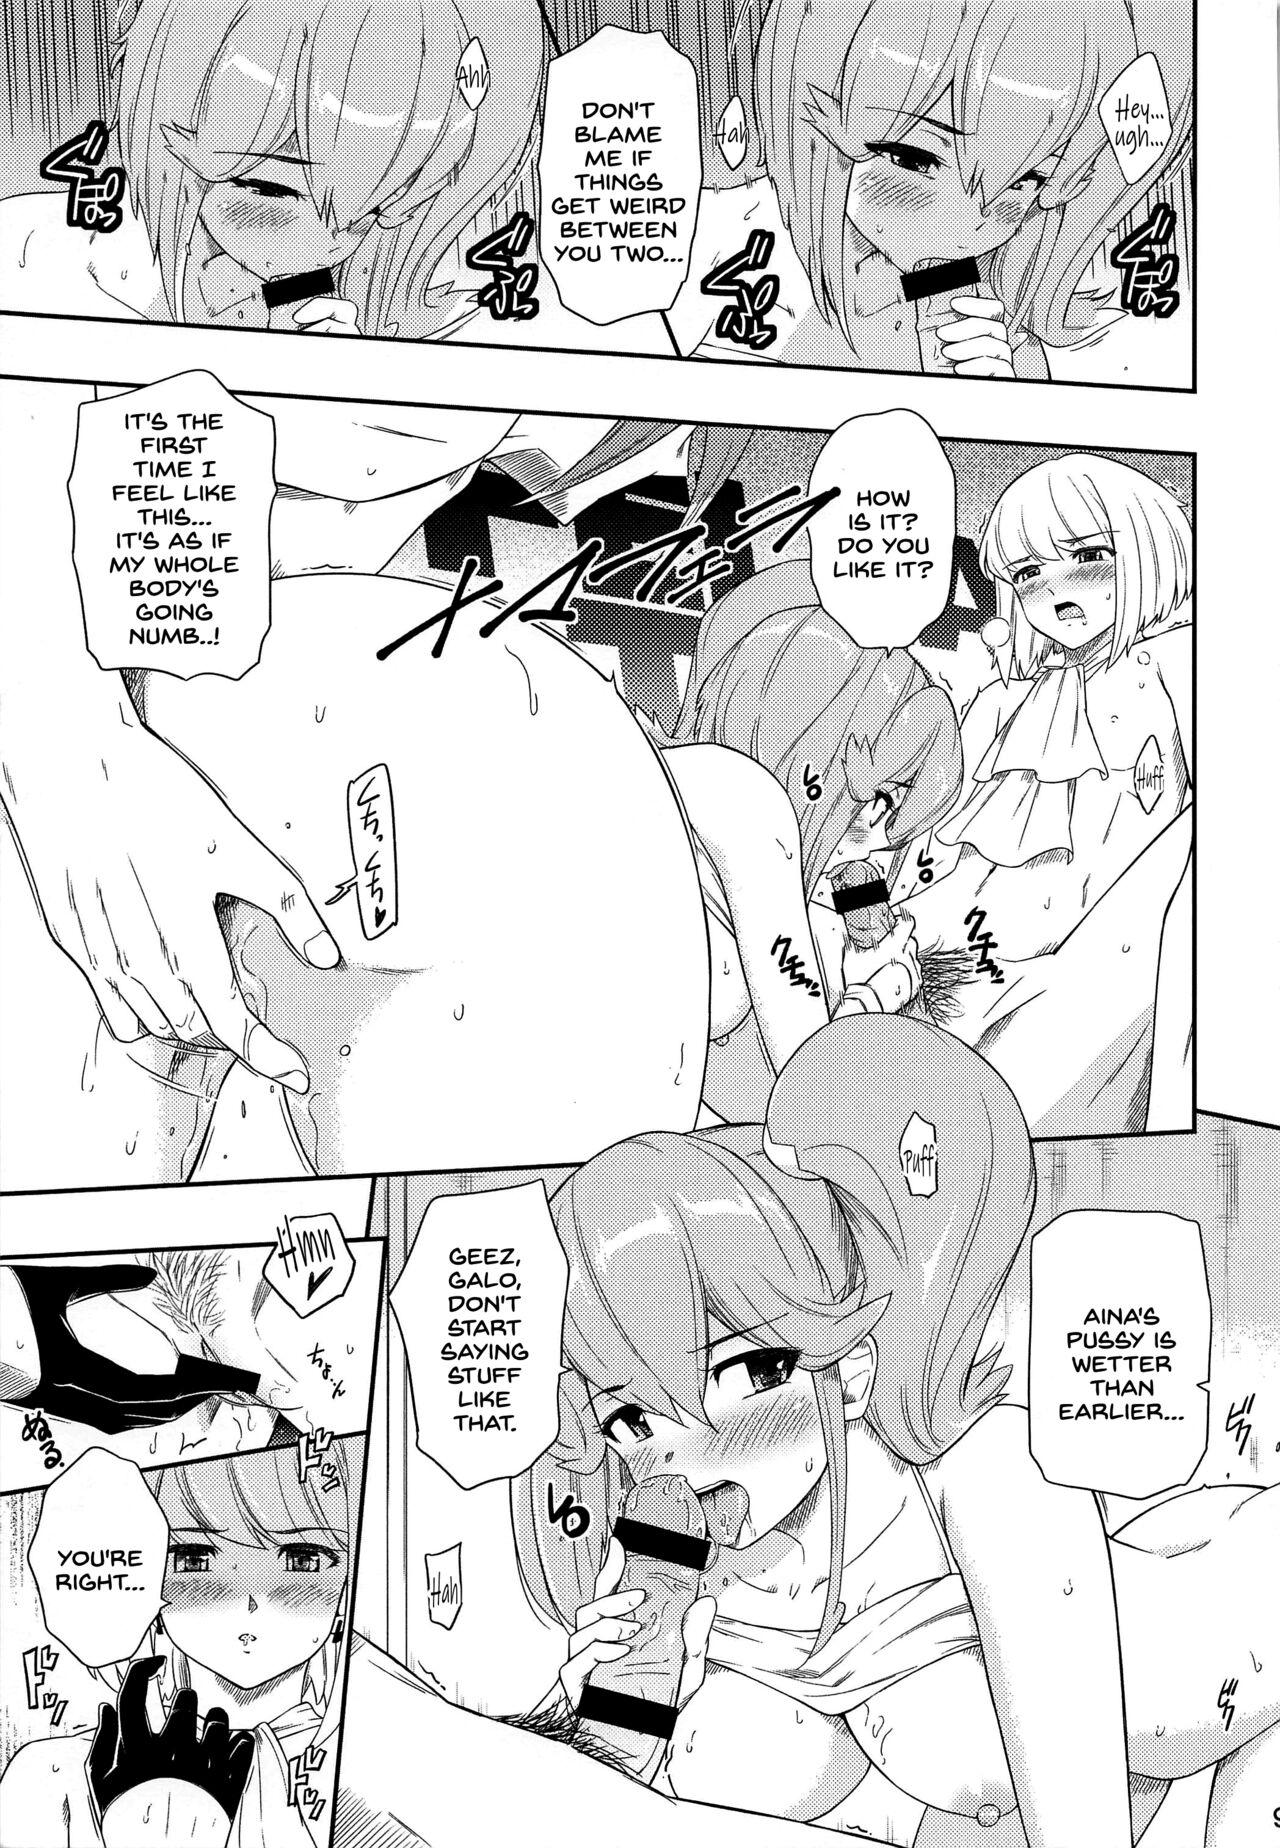 Bottom EROMARE - Suddenly 3P sex is happening... Pussyeating - Page 8